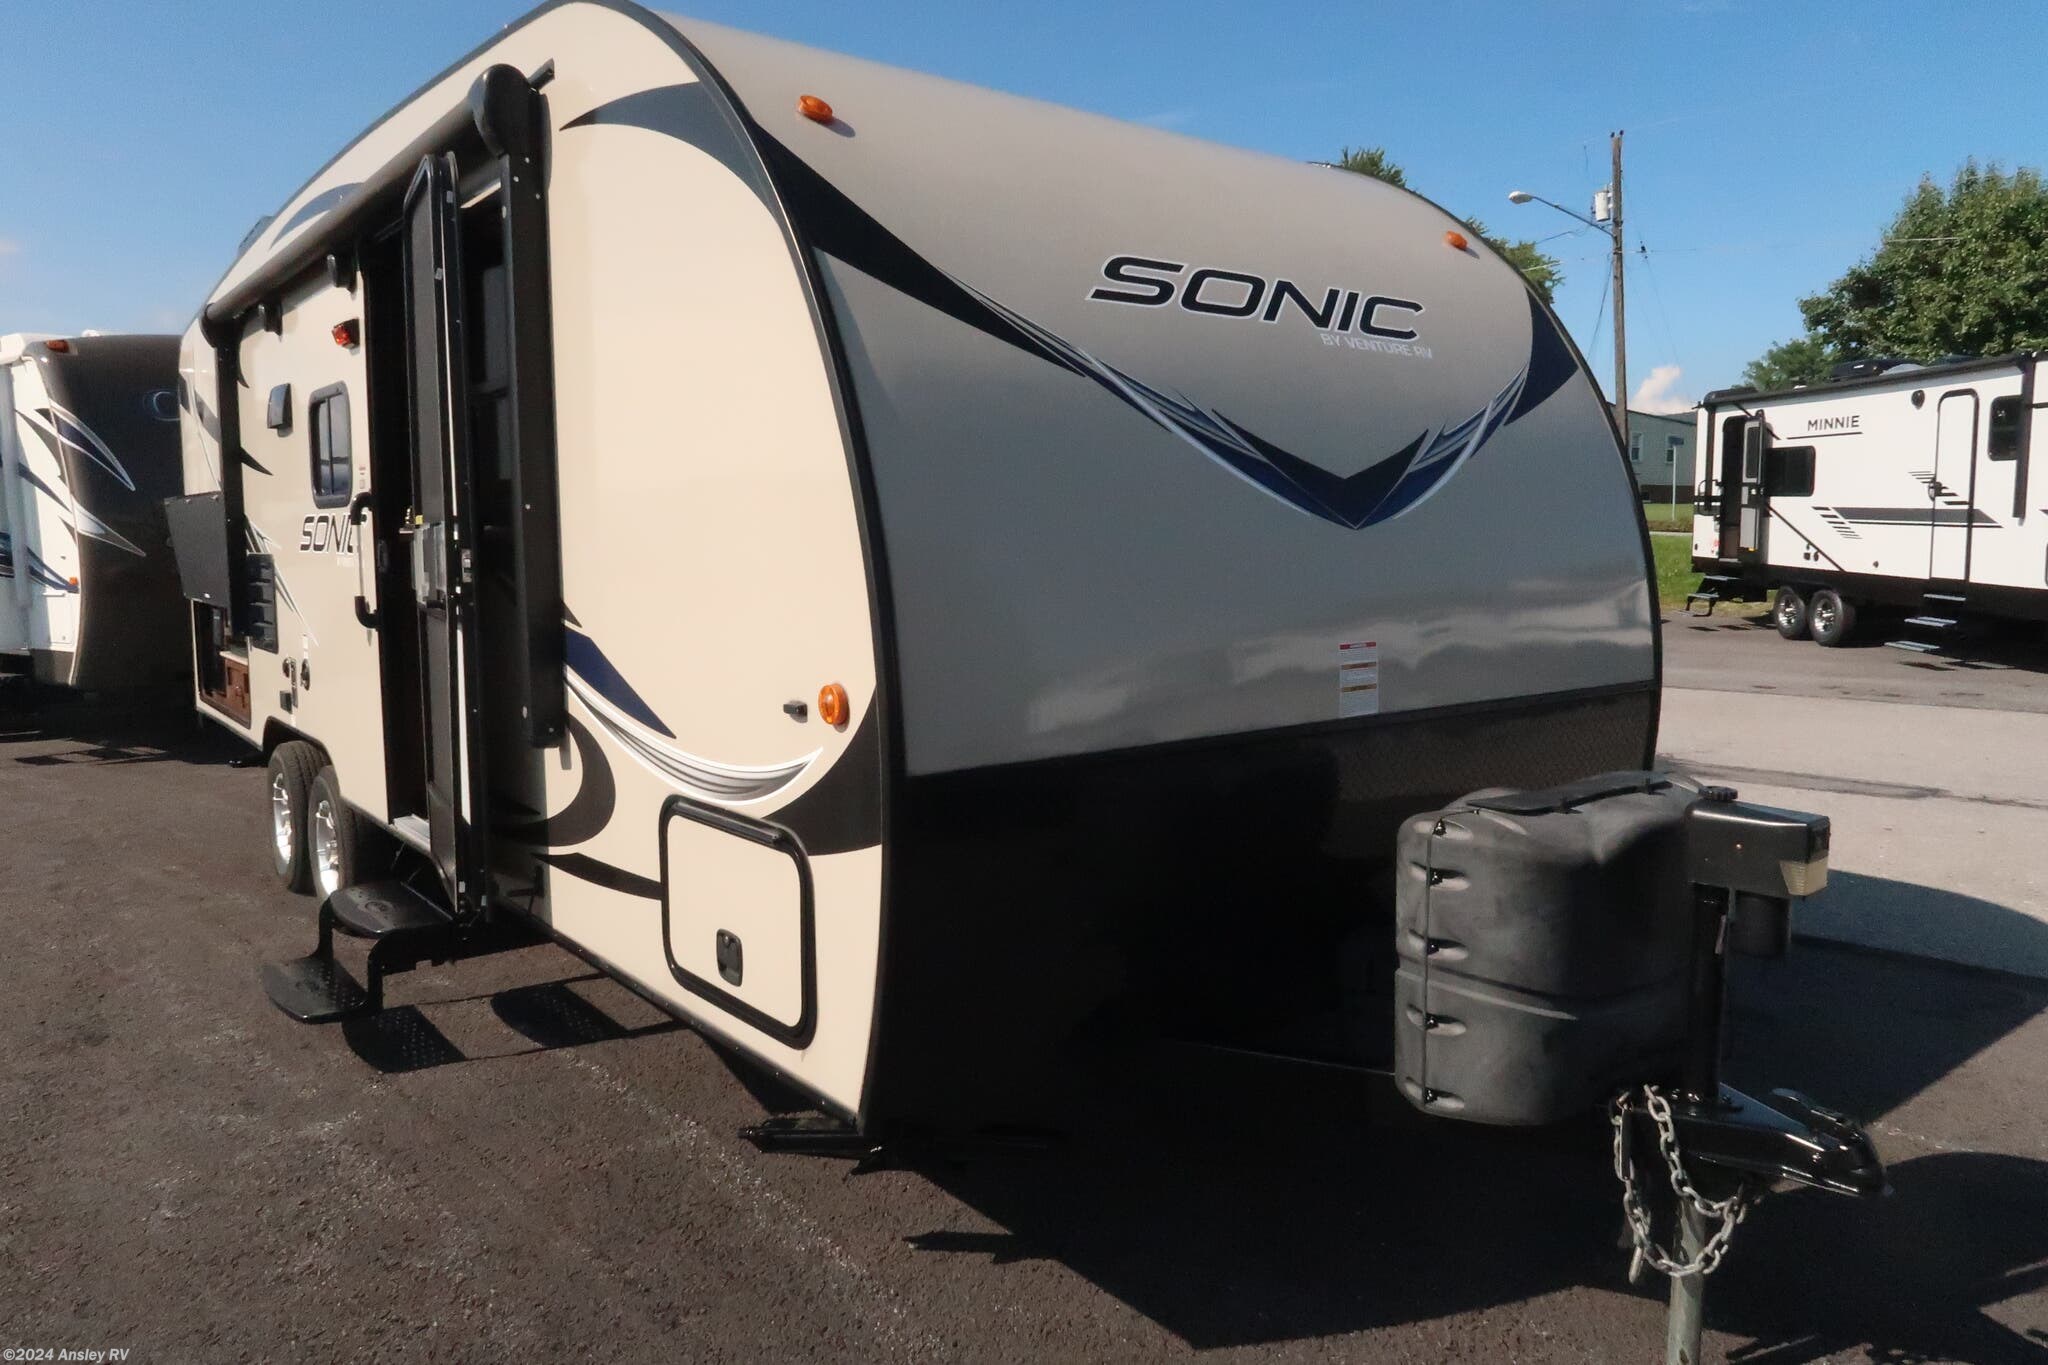 21 Venture RV Sonic SN21VRB RV for Sale in Duncansville, PA ...